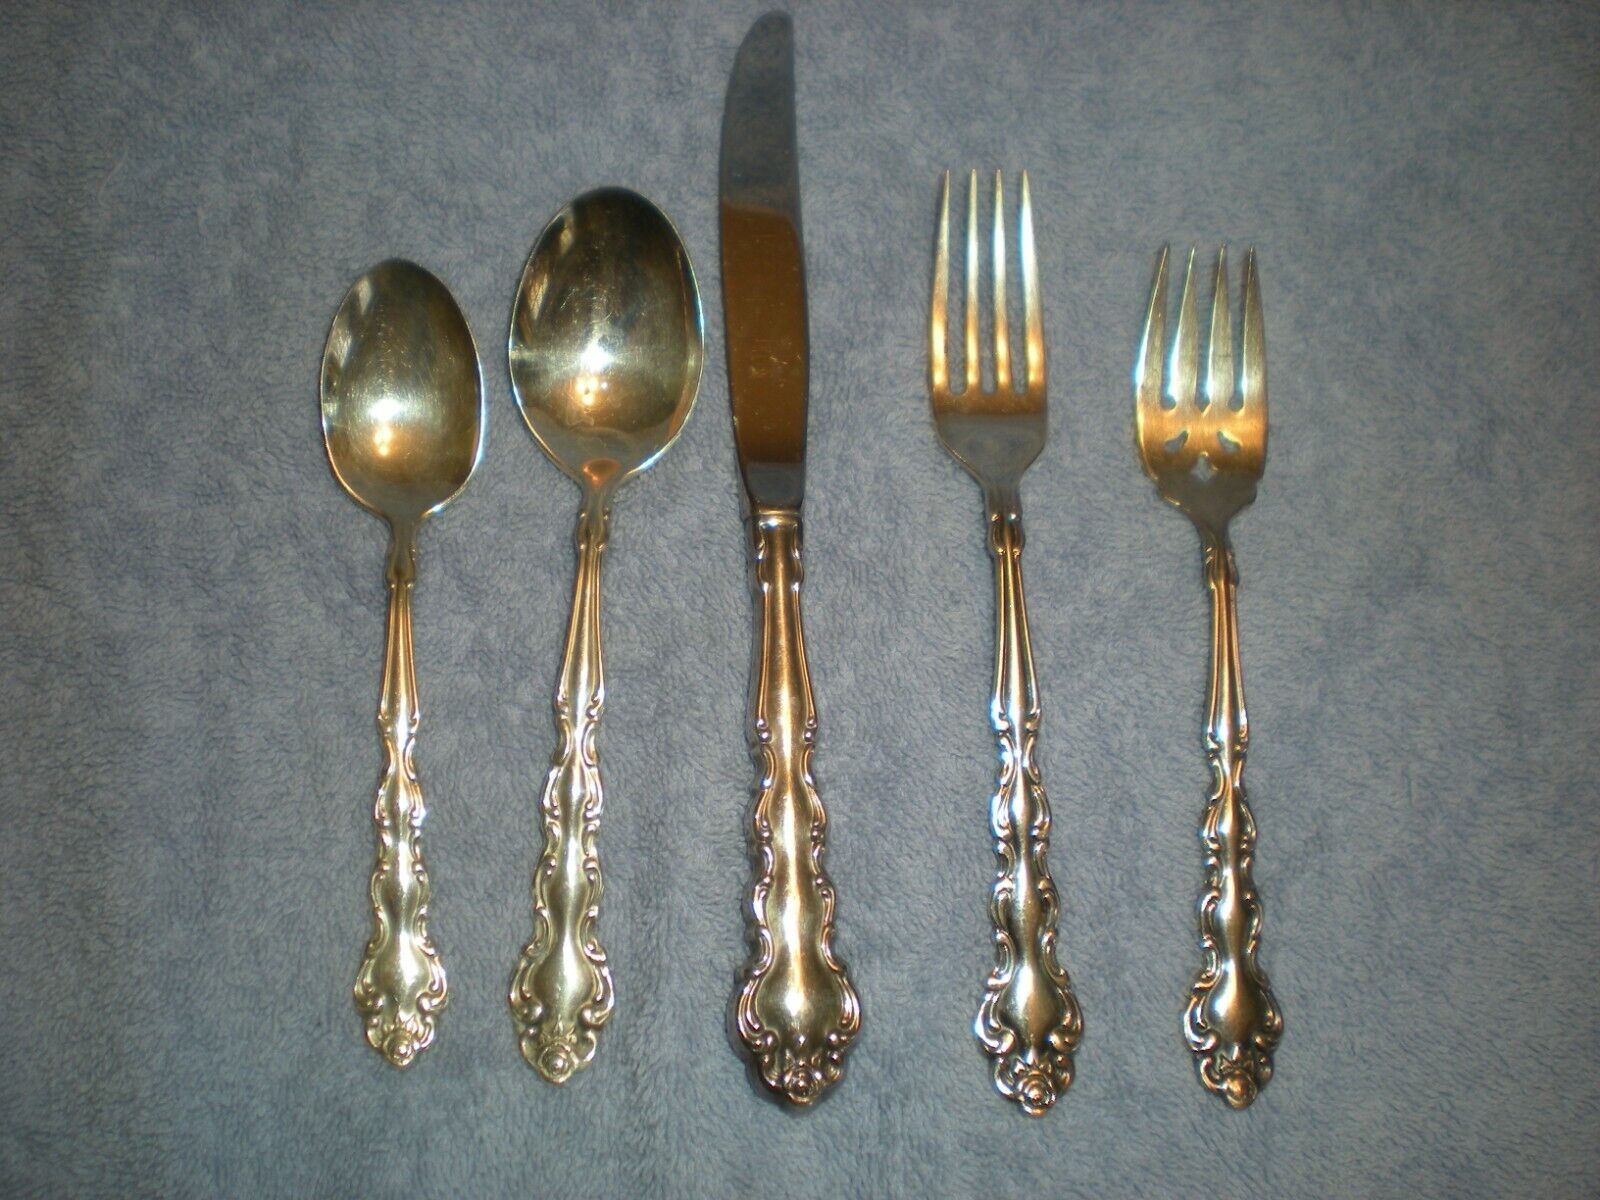 3pt8 💕 ONEIDA COMMUNITY SILVERWARE BEETHOVEN 5-PIECE PLACE SETTING  ST135